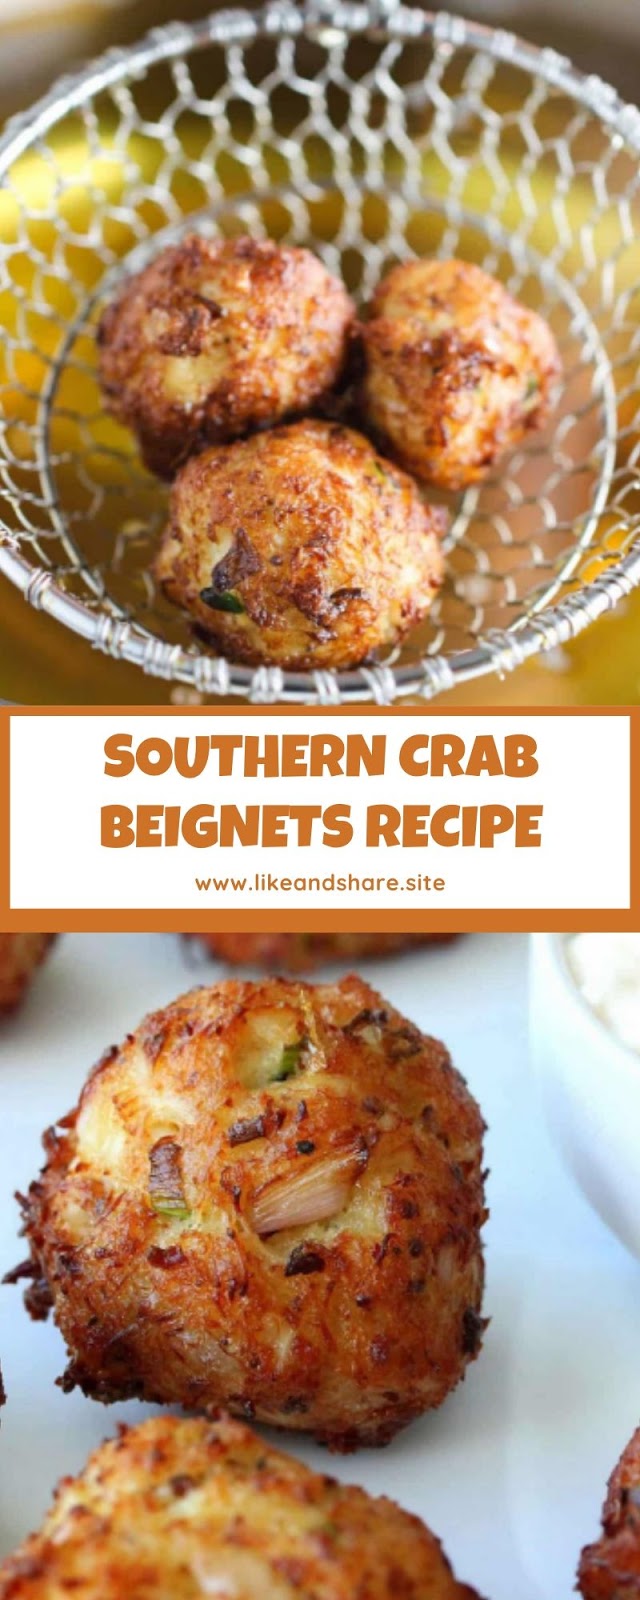 SOUTHERN CRAB BEIGNETS RECIPE